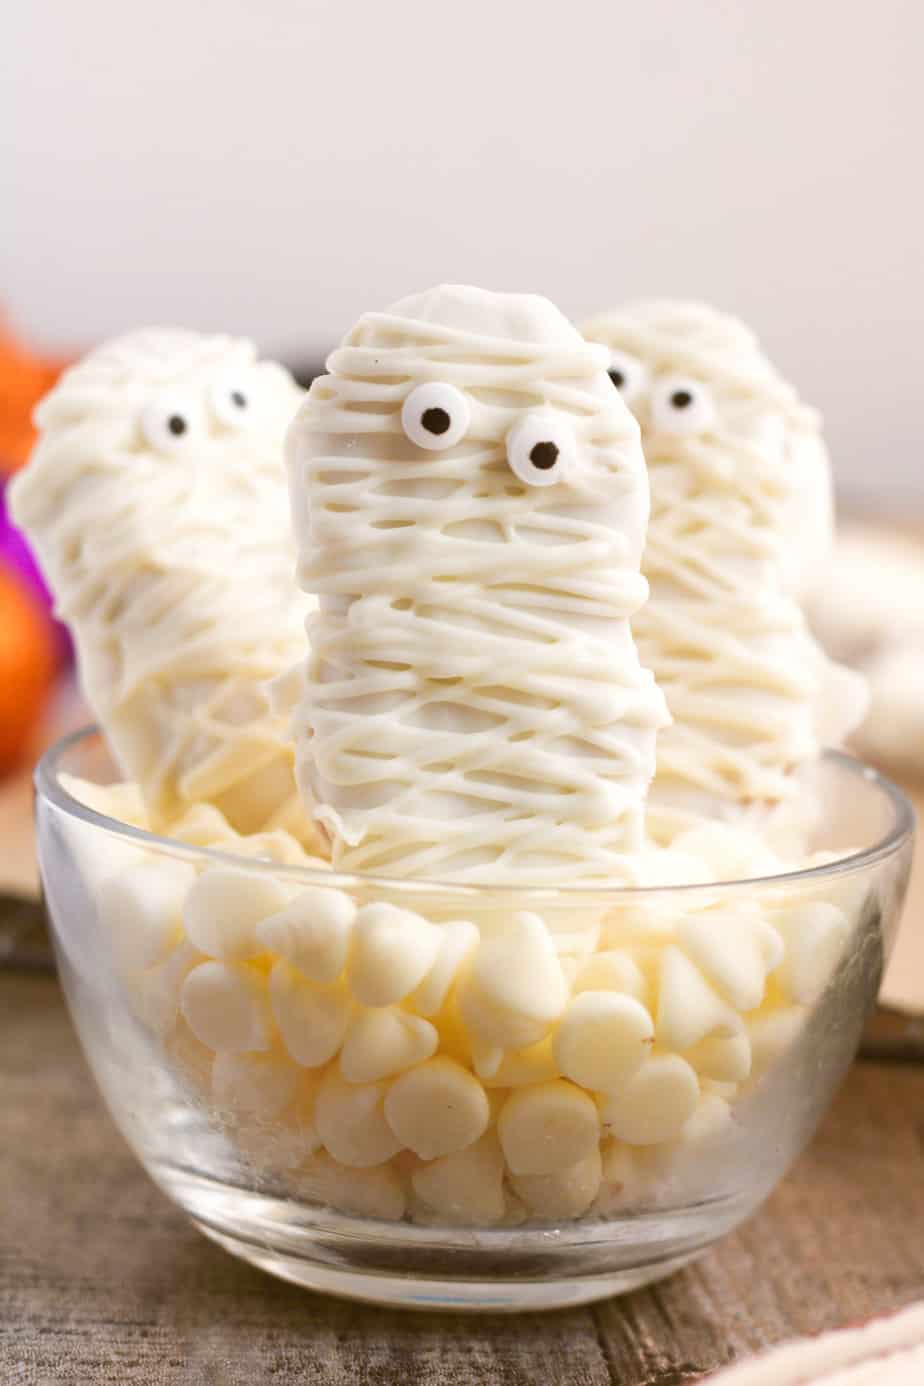 Three cookies decorated with white chocolate to look like mummies stacked upright in a serving bowl.